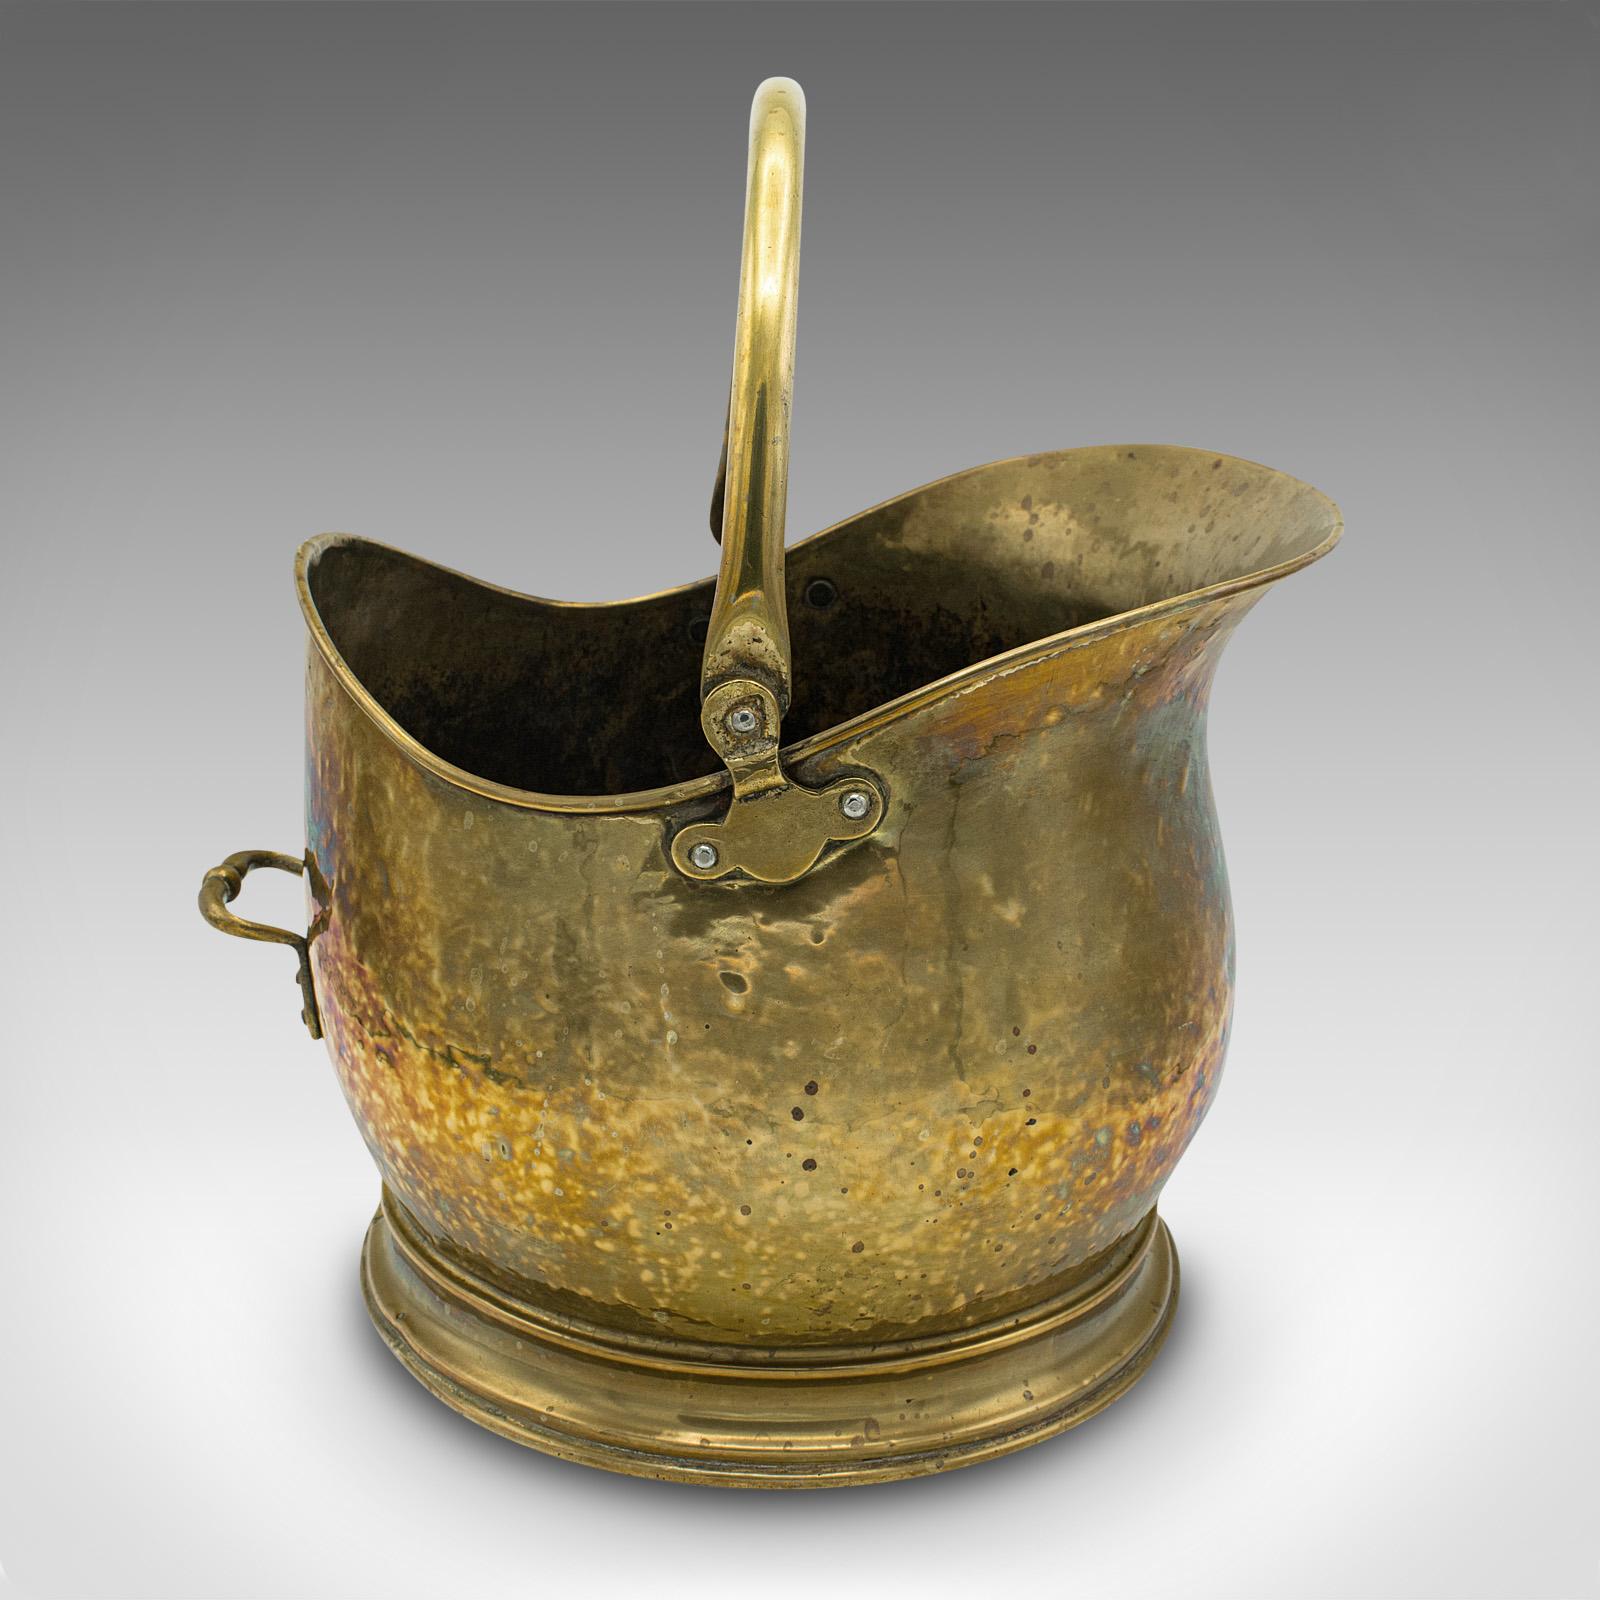 This is an antique helmet scuttle. An English, brass coal bucket or fireside bin, dating to the late Victorian period, circa 1880.

Attractive helmet shaped scuttle with appealing beaten finish and colour
Displaying a desirable aged patina and in